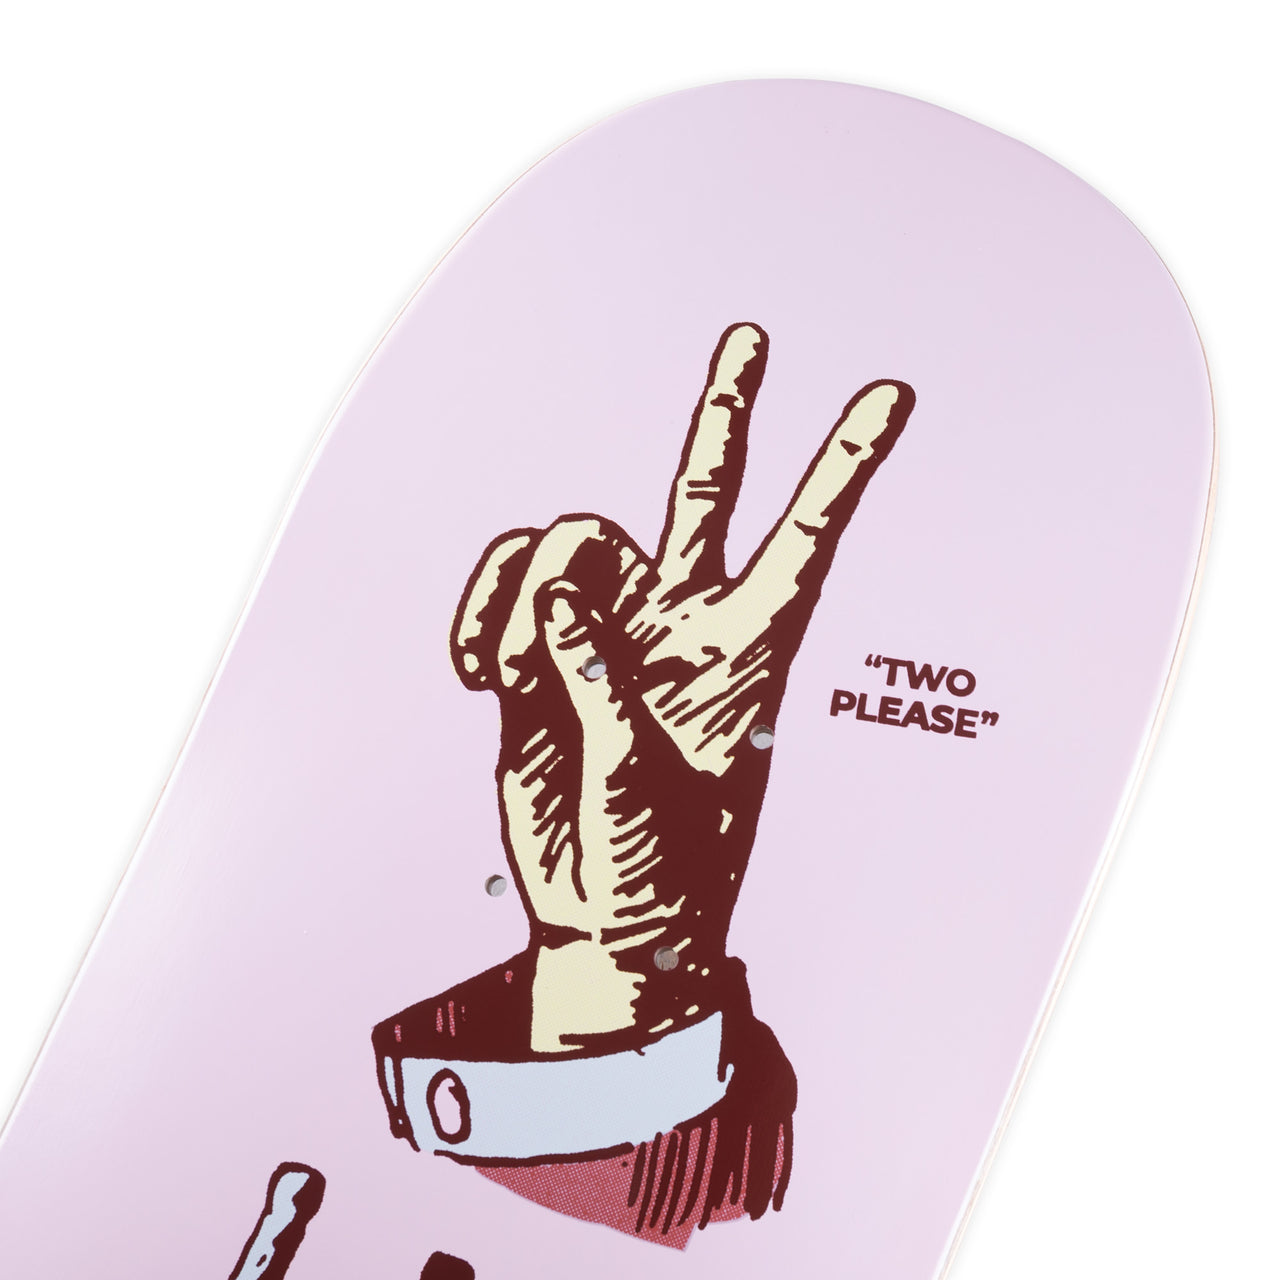 PASS~PORT - "SPIN ME ROUND" TWO PLEASE SKATEBOARD DECK - 8.125